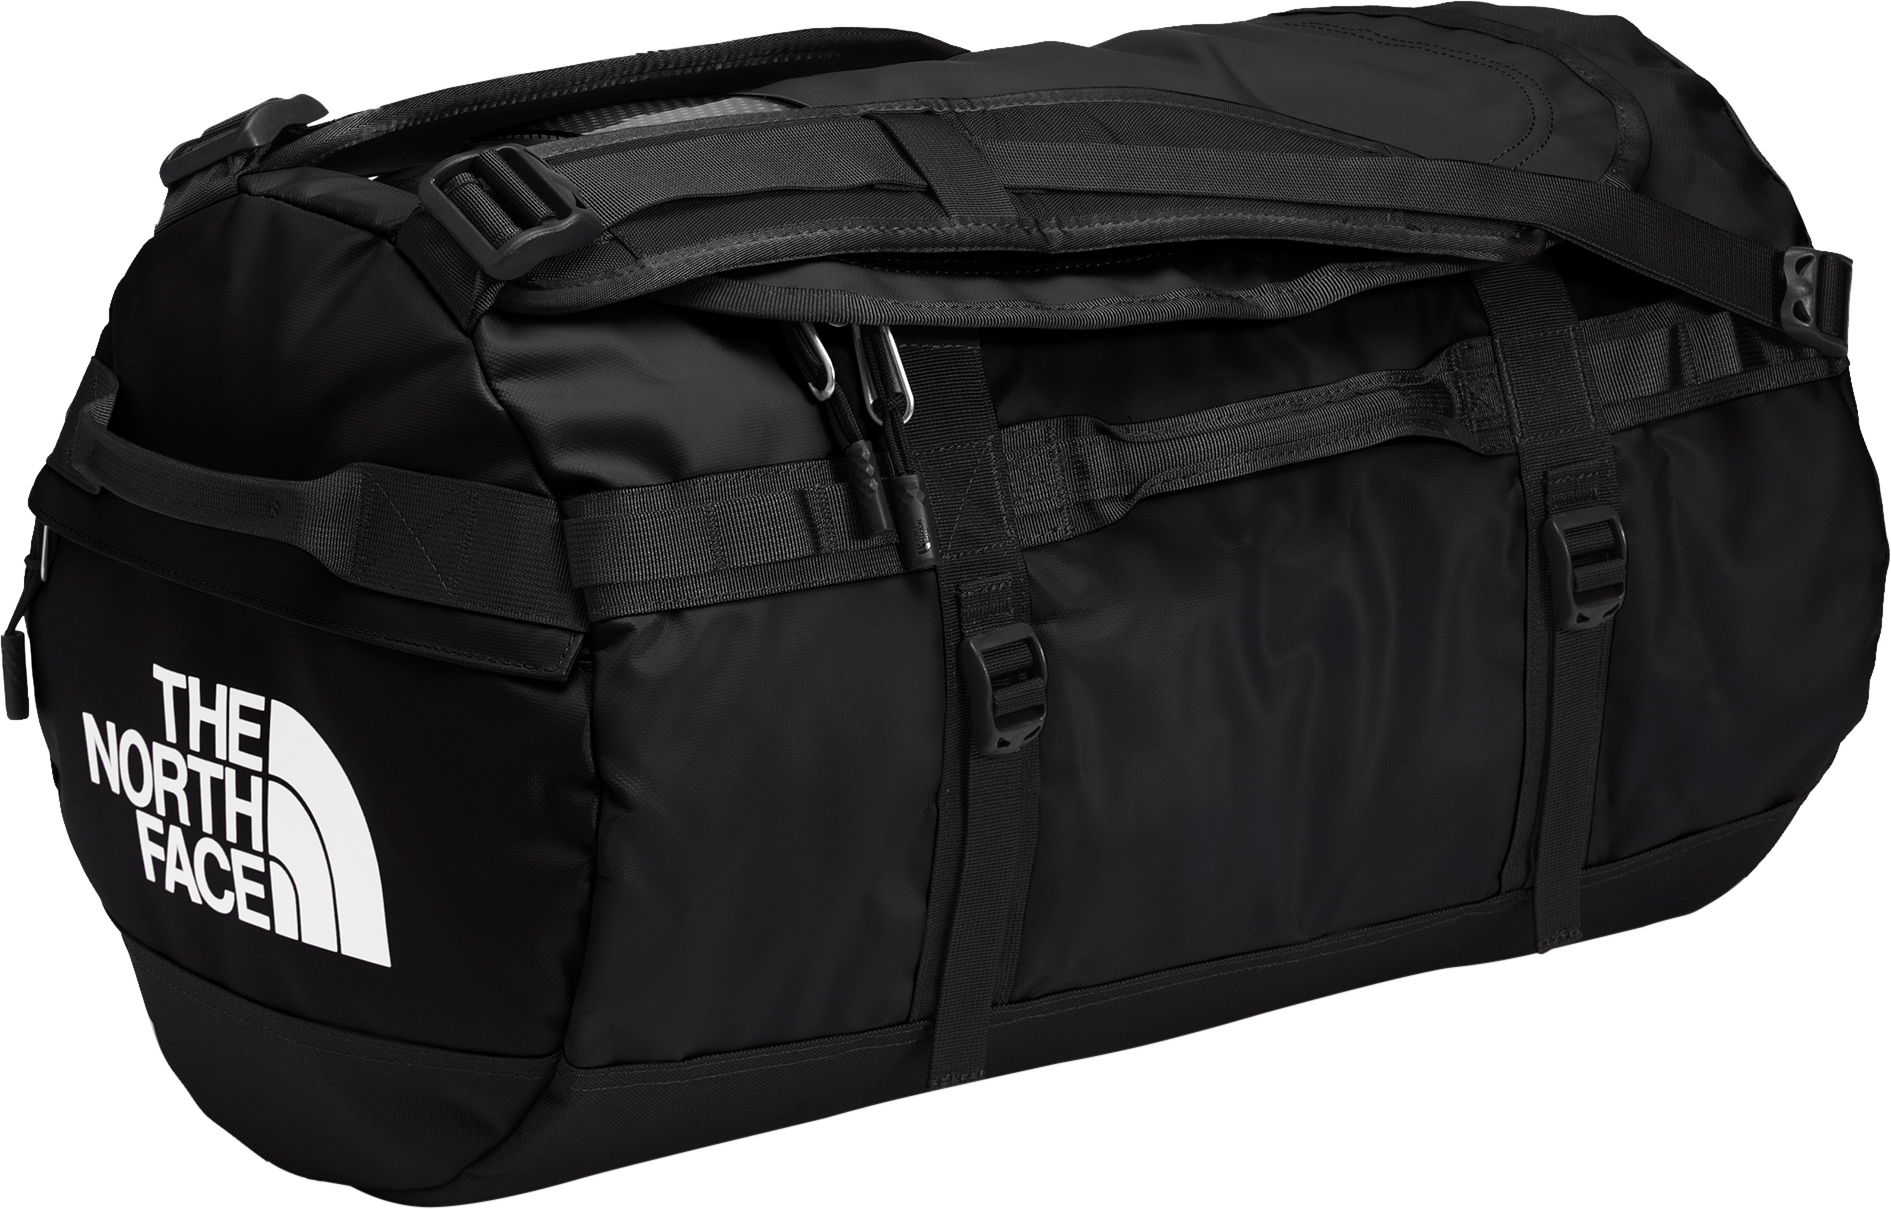 The North Face Duffel Bags